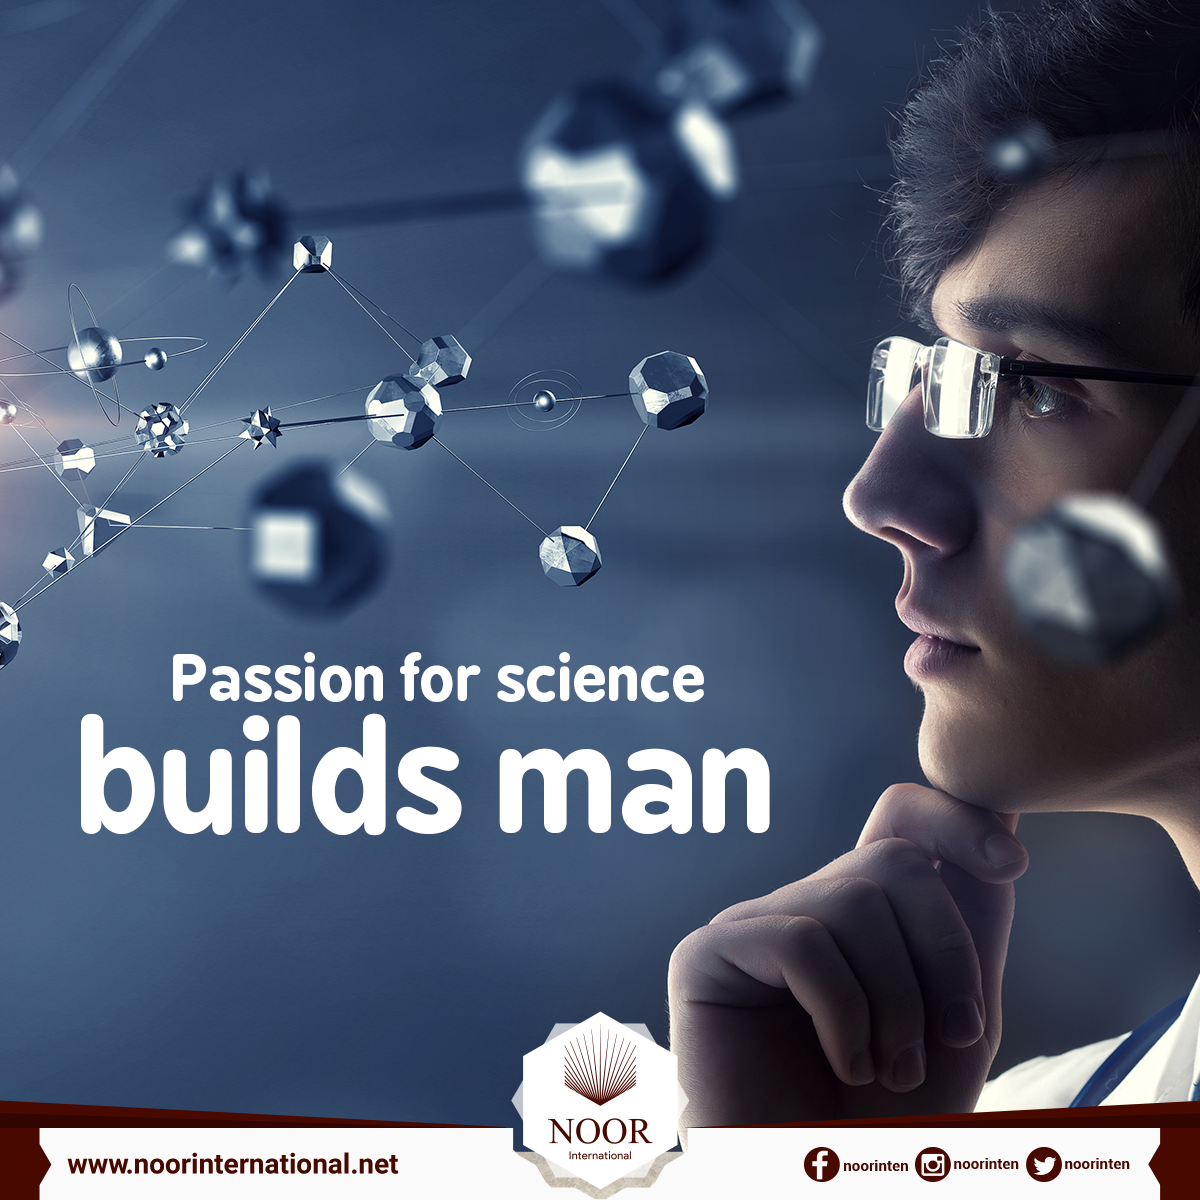 Passion for science builds man